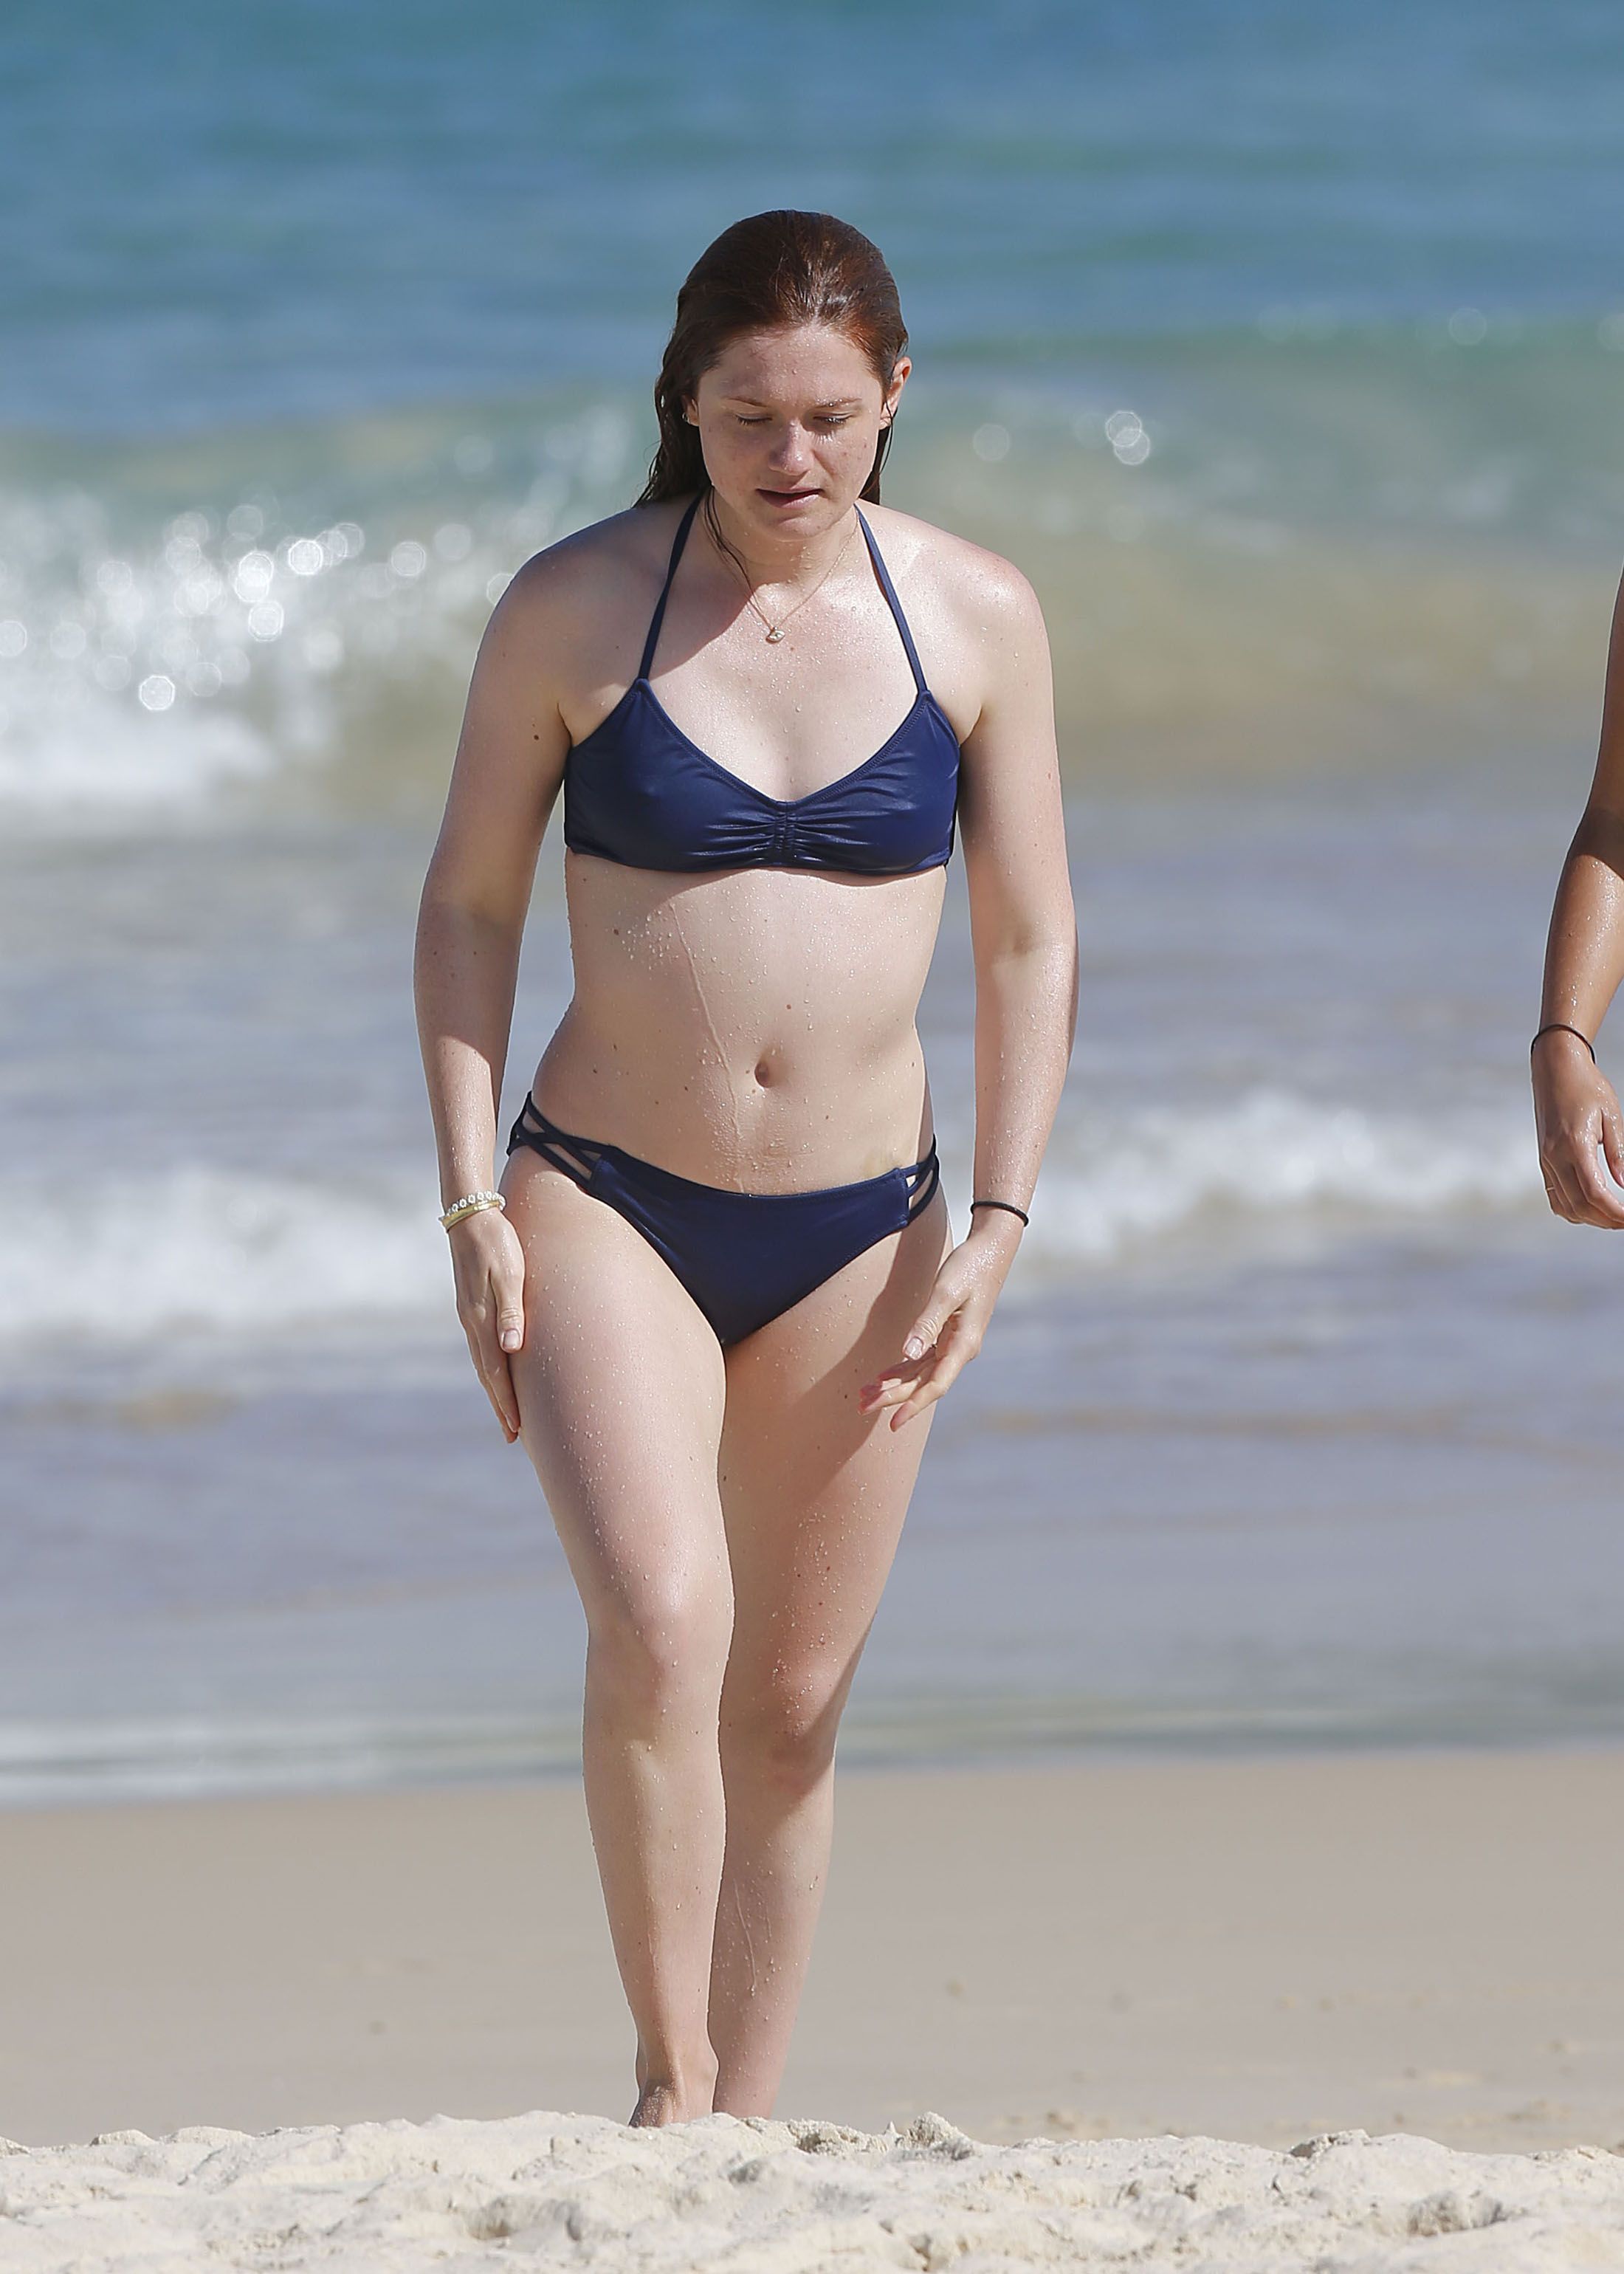 bonnie wright hot and nude videos